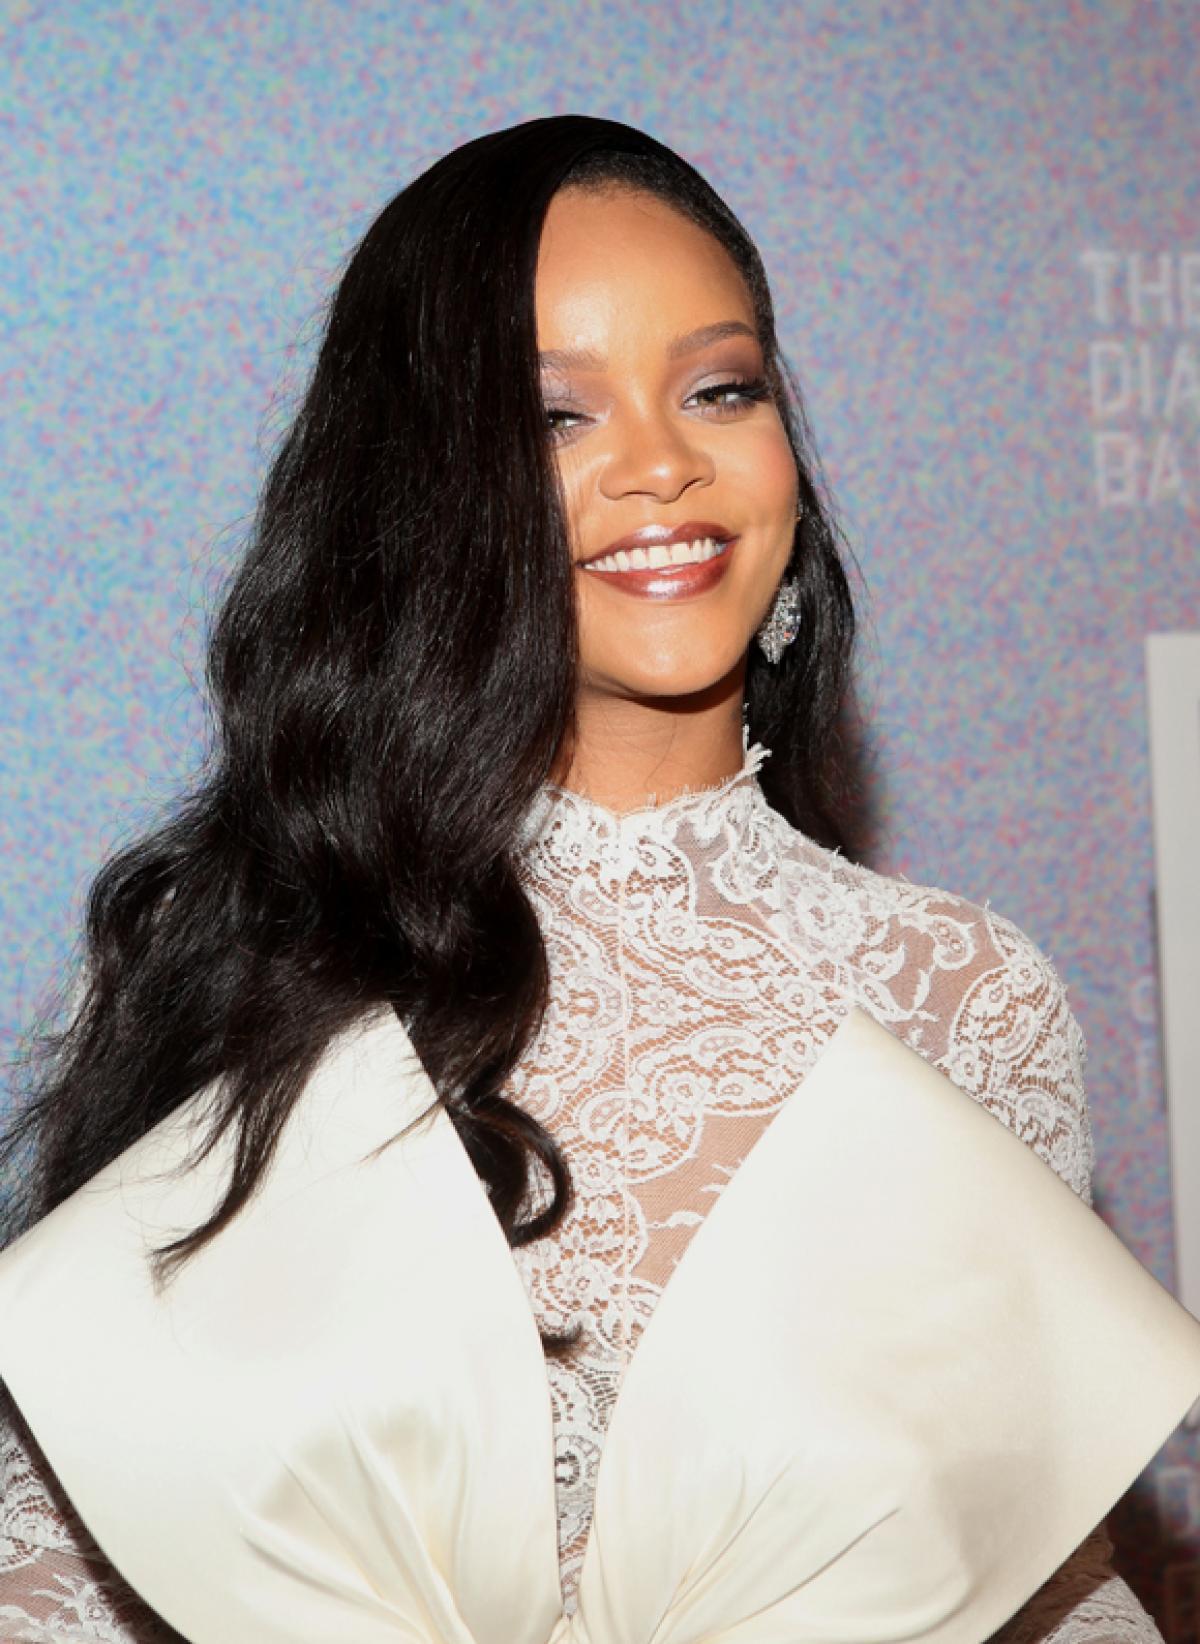 Rihanna's high-fashion line will debut later this month